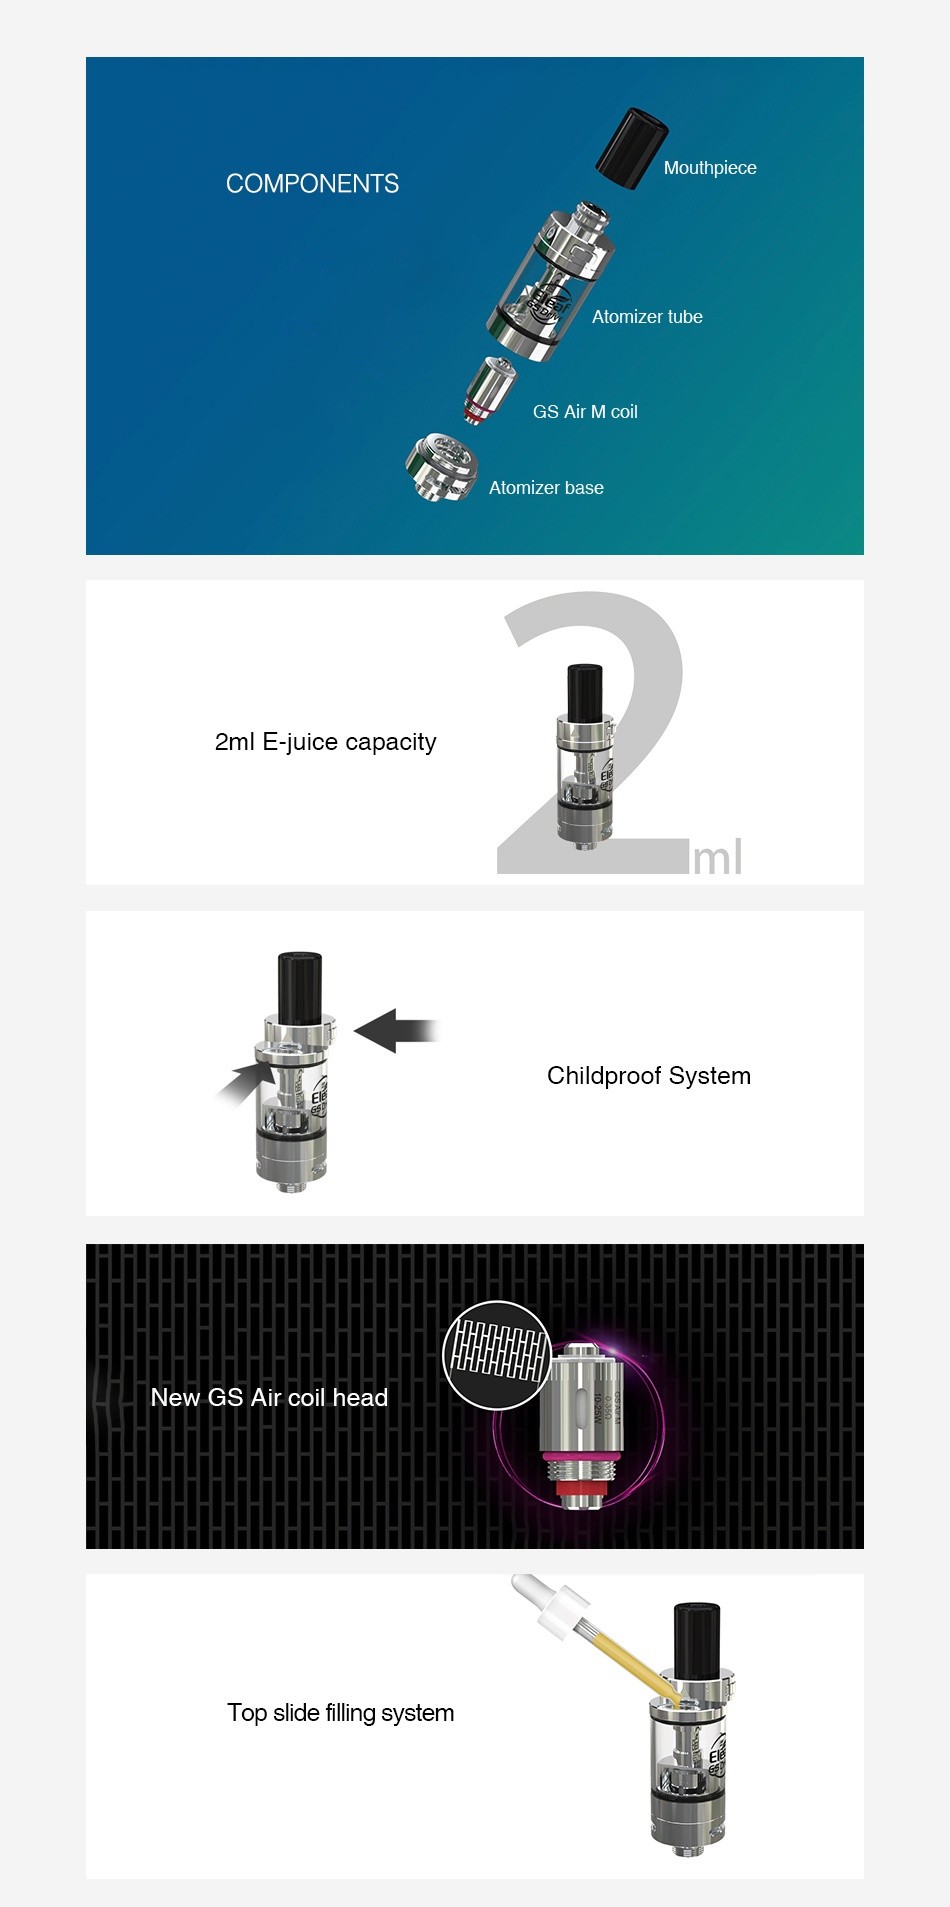 Eleaf GS Drive Atomizer 2ml Mouthpiece COMPONENTS Atomizer tube GS Air M co a Atomizer base 2ml E juice capacity Childproof system New gs air coil head Top slide filling system